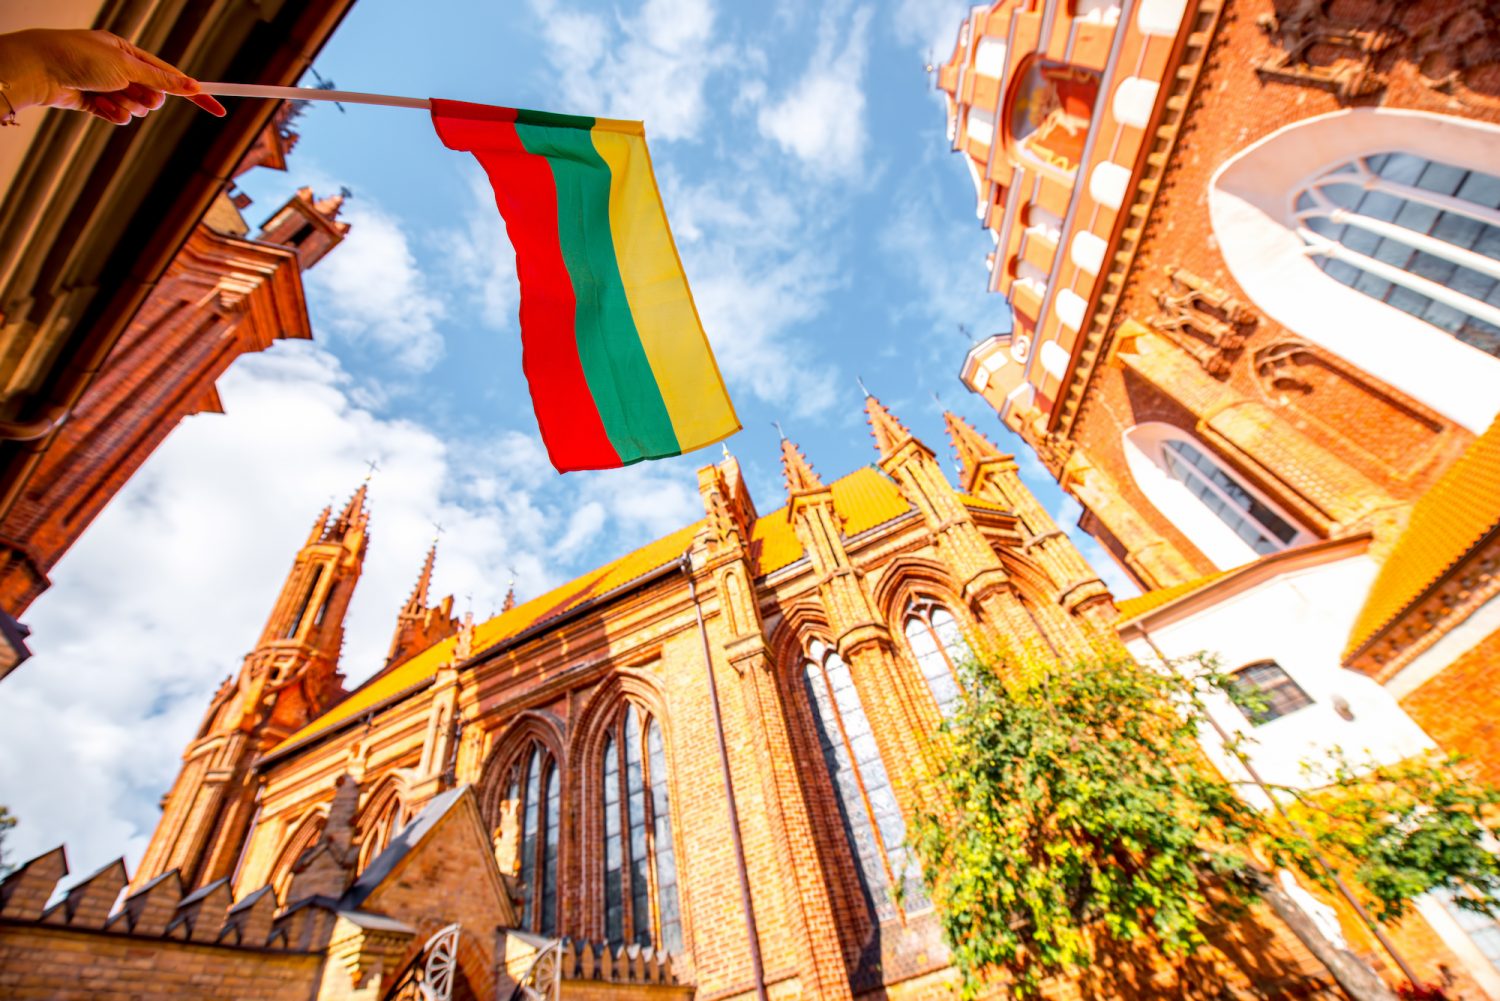 Lithuania Proclaims Launch of Commemorative Digital Tokens